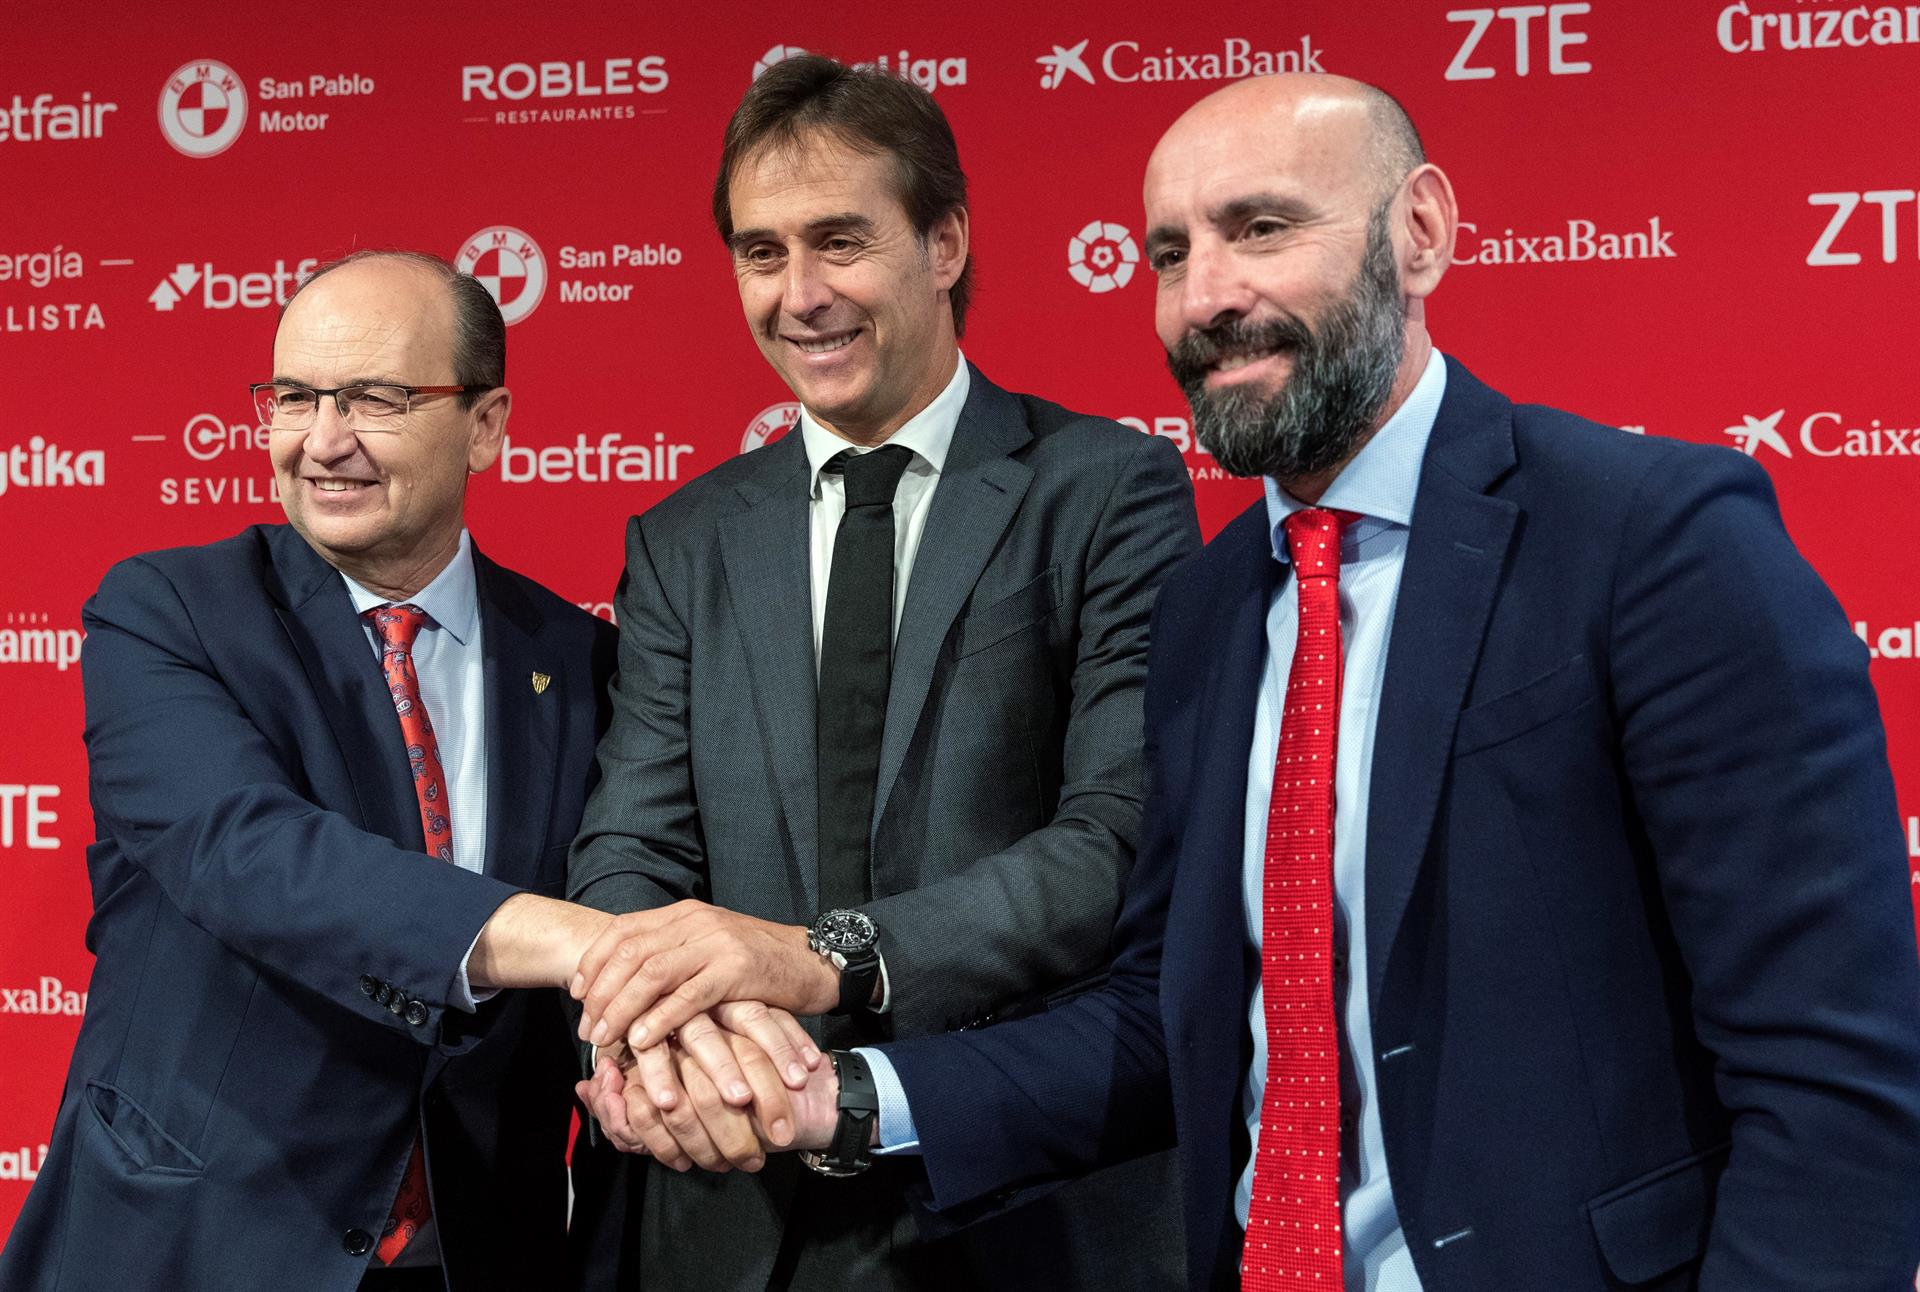 Julen Lopetegui on dealing with the media – ‘Football is a circus, my head is in the lion’s mouth’